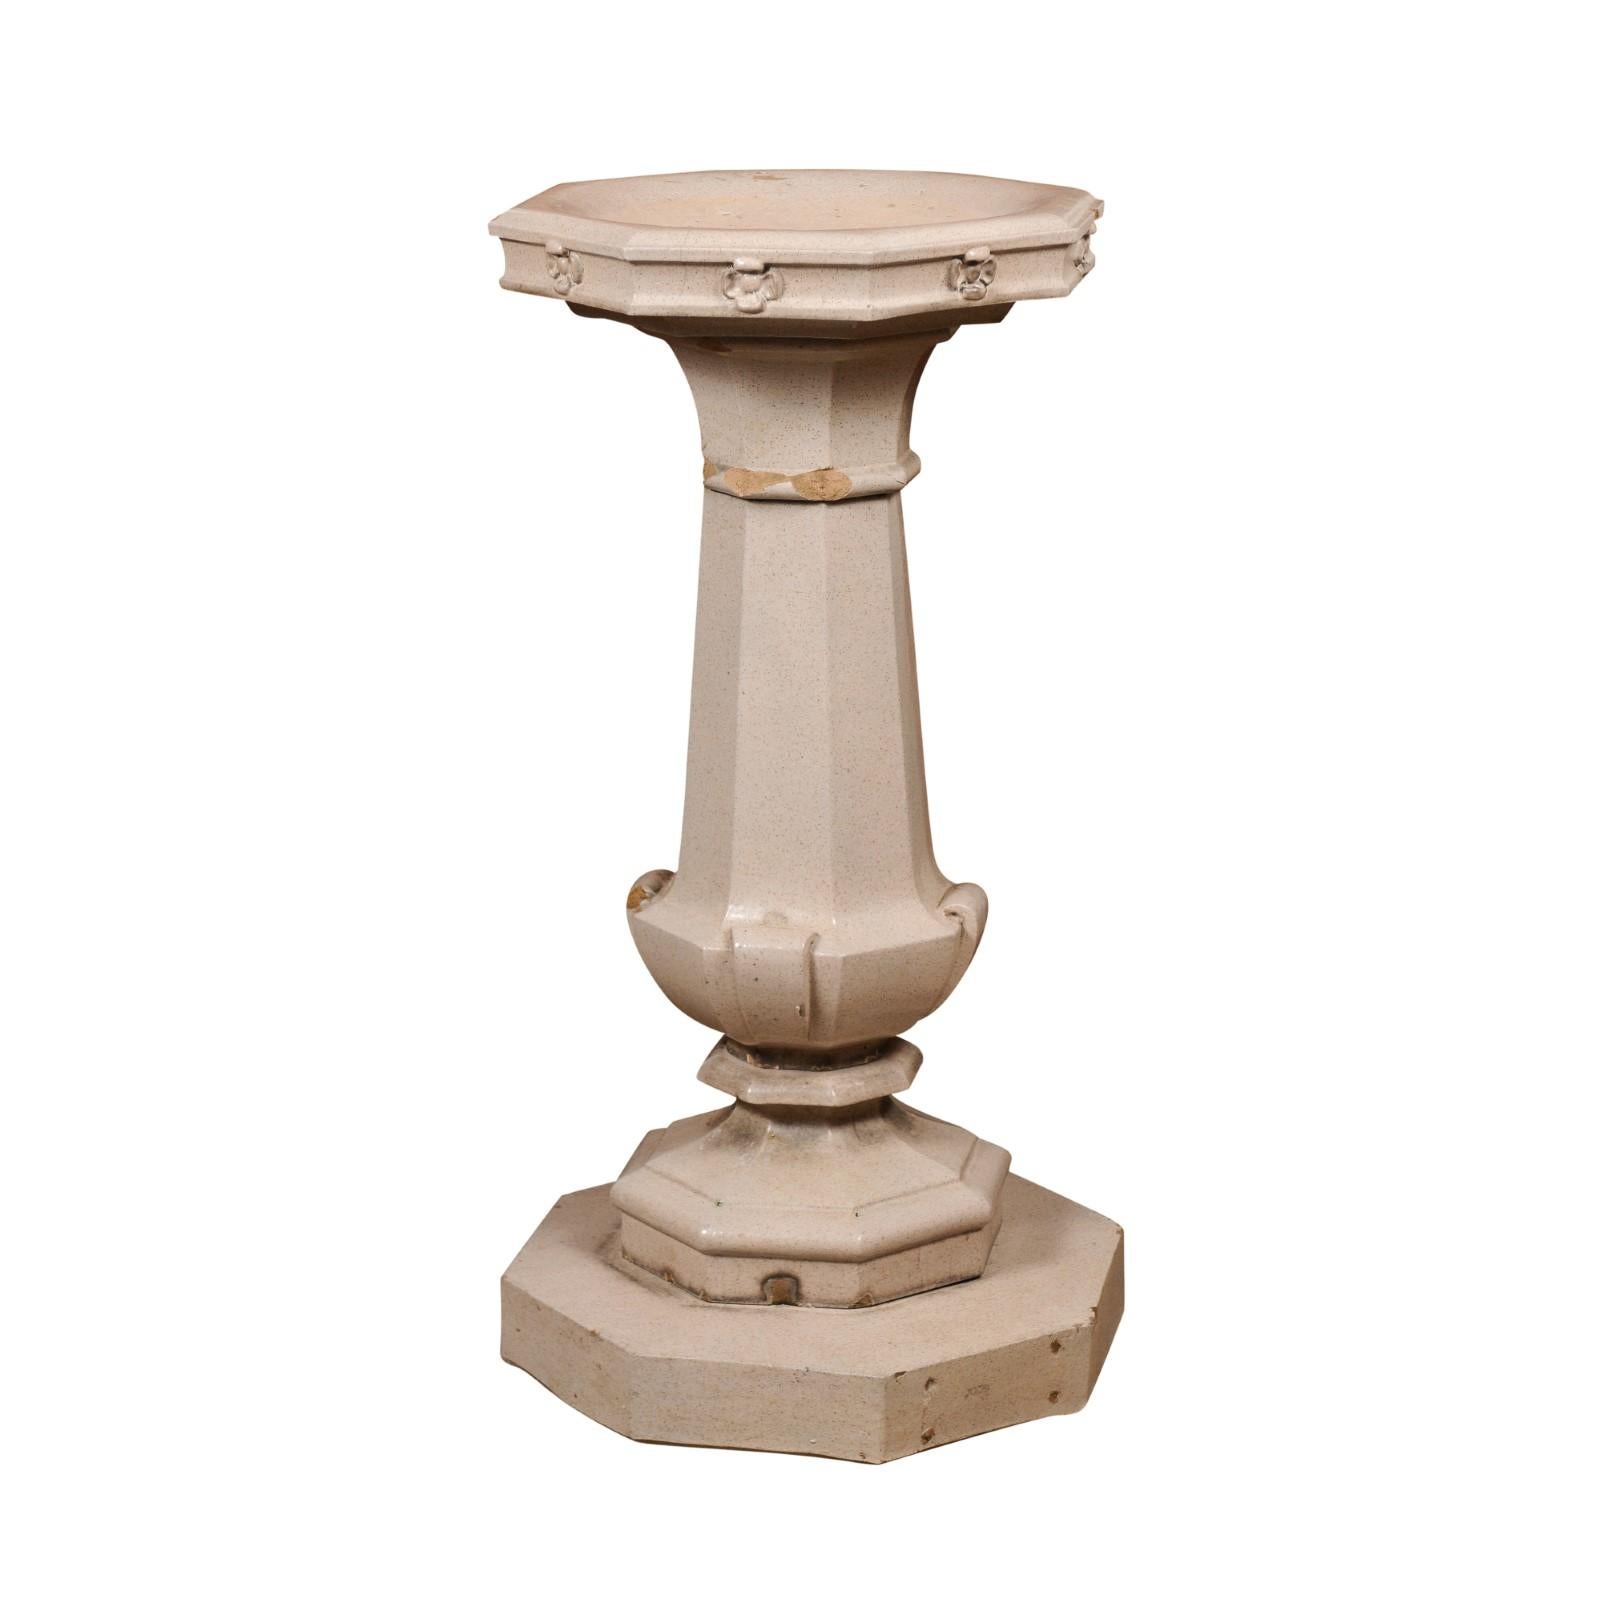 An English turn of the century glazed pottery bird bath from the early 20th century, with octagonal top, carved flowers, tapered pedestal and stepped base. Created in England at the Turn of the Century which saw the transition between the 19th to